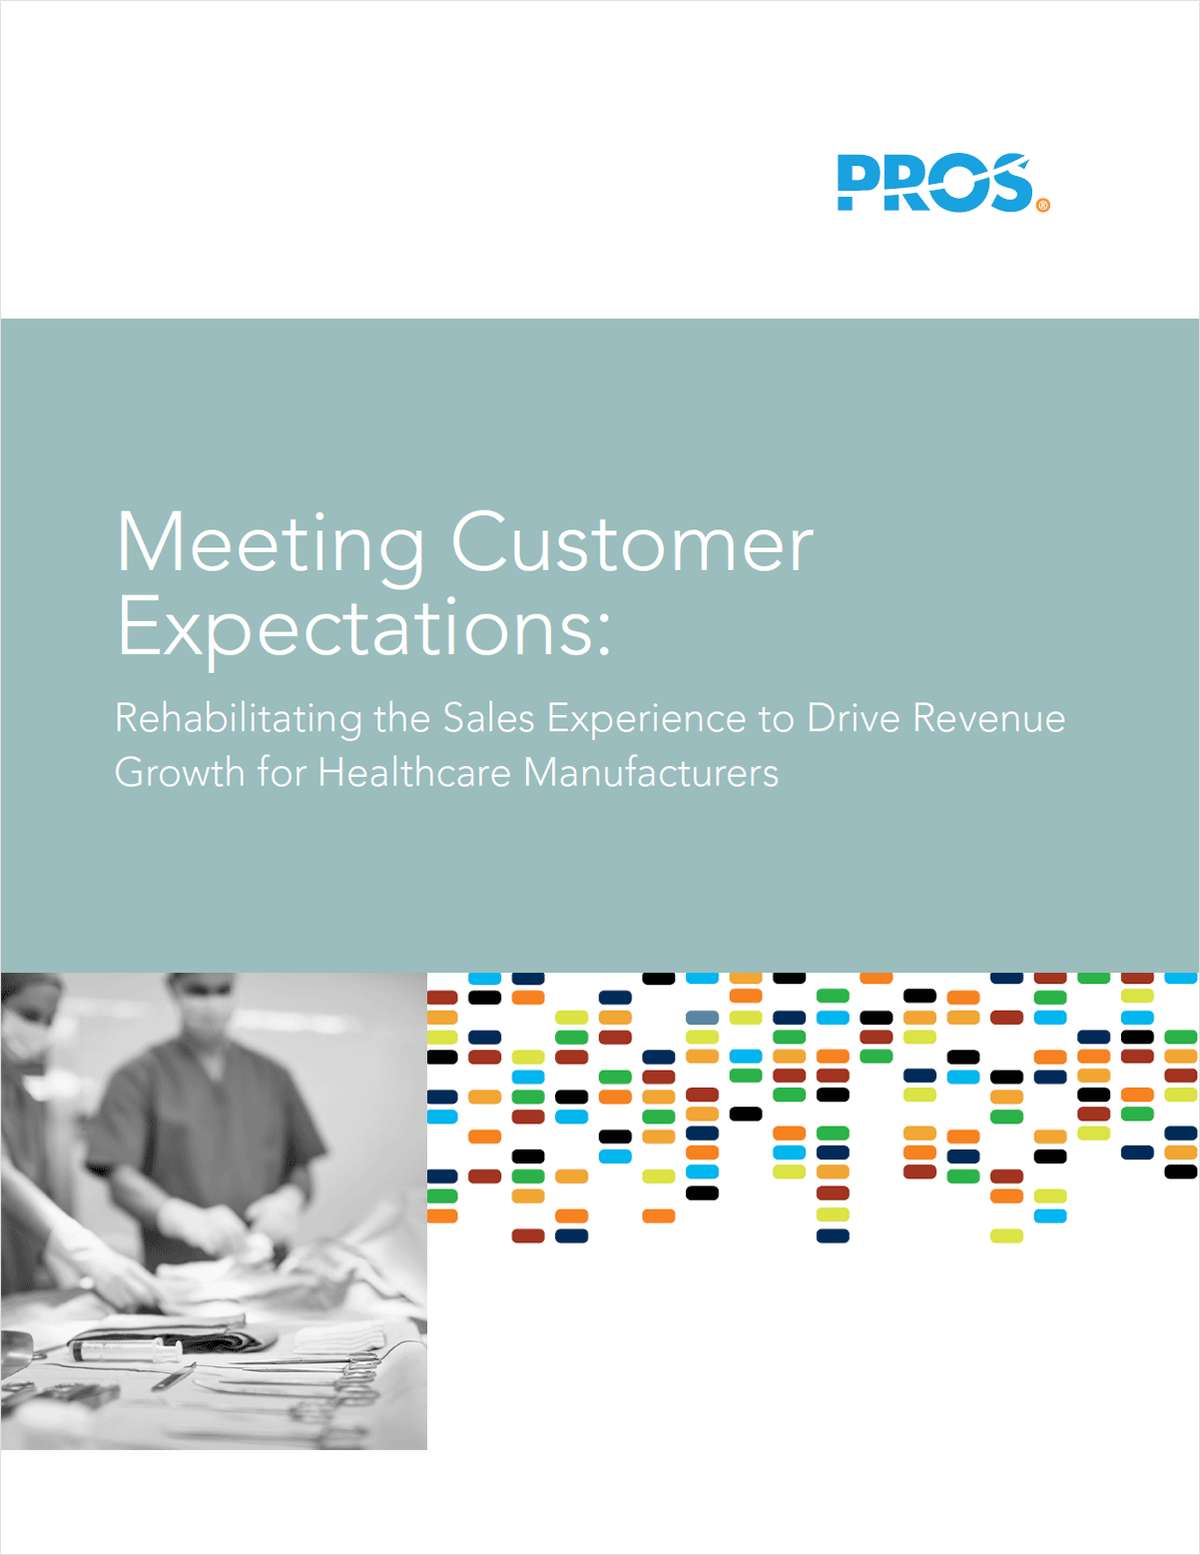 Meeting Customer Expectations: Rehabilitating the Sales Experience to Drive Revenue Growth for Healthcare Manufacturers